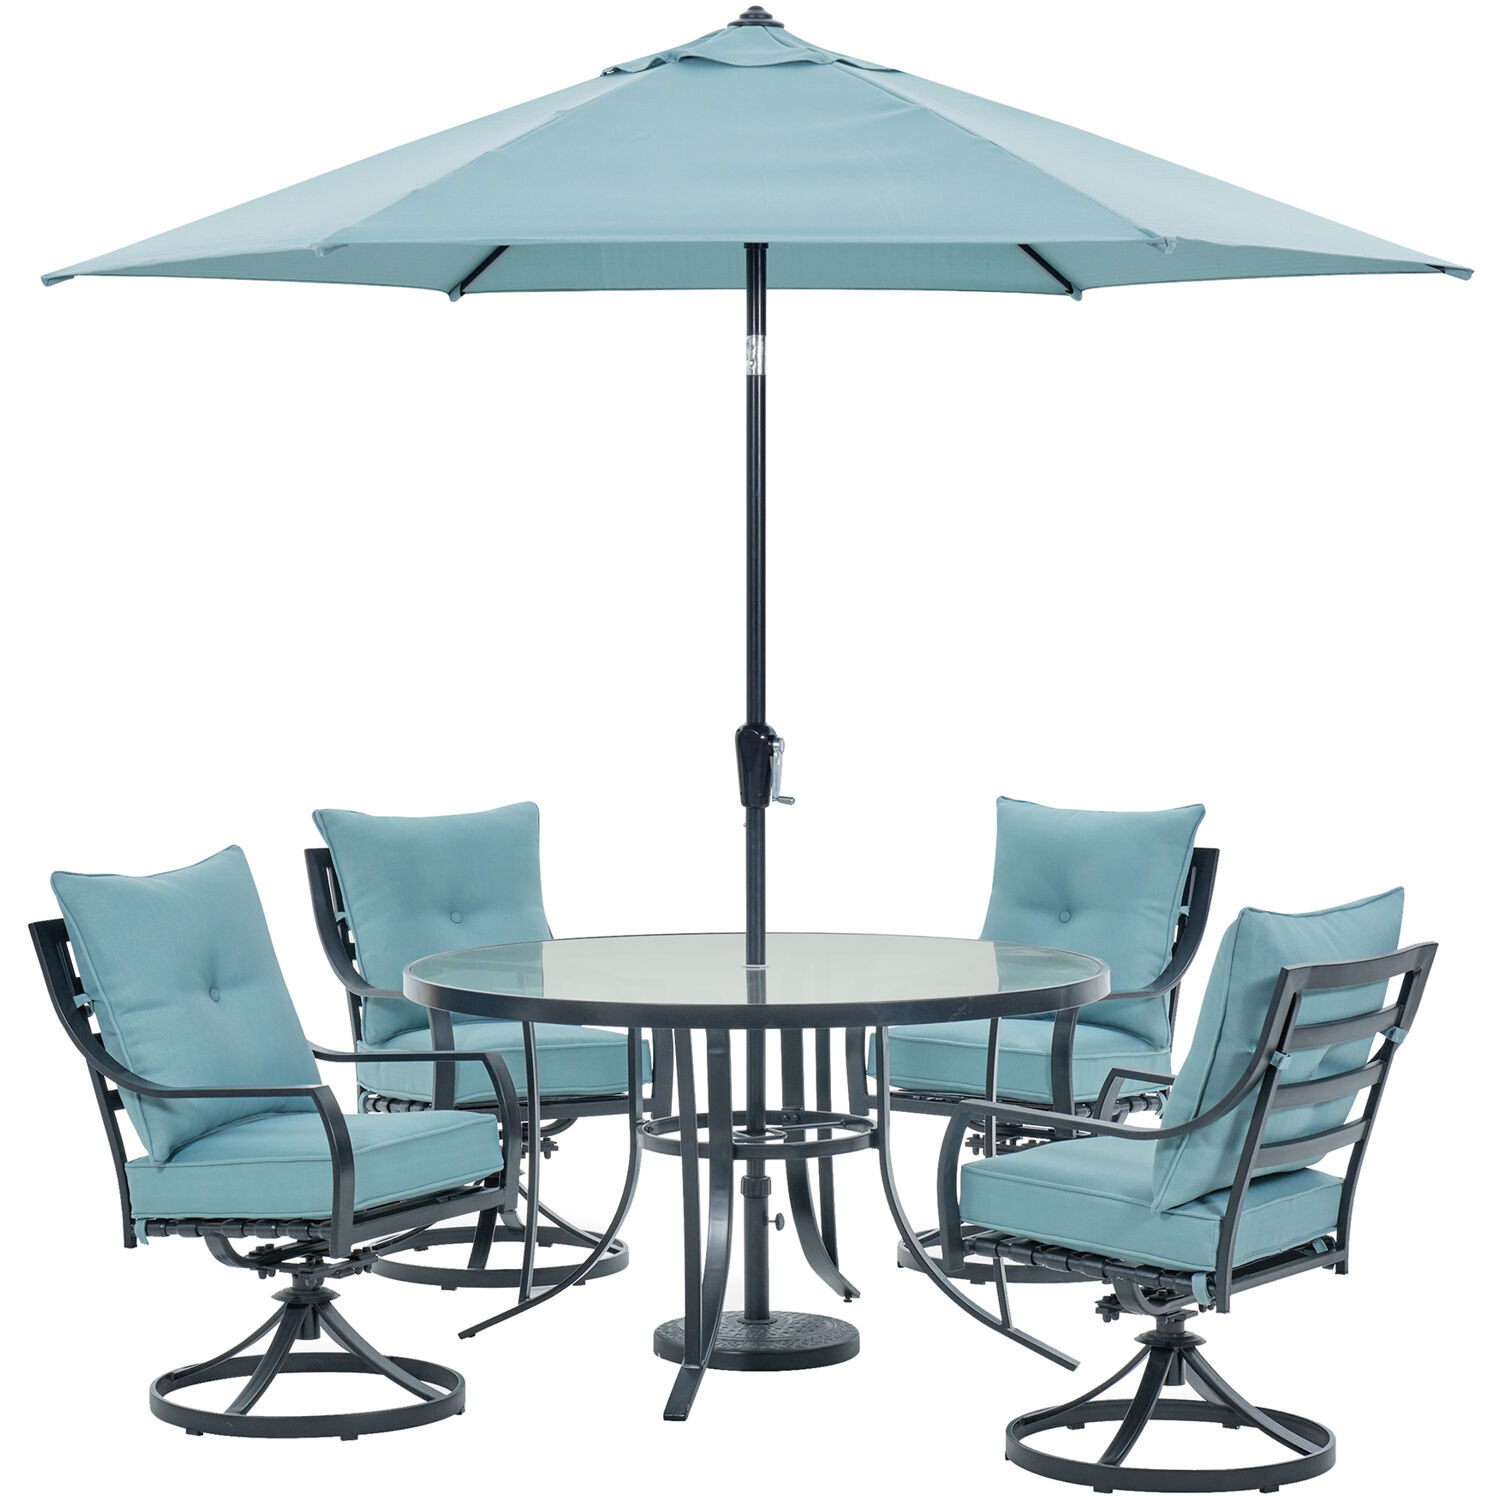 Hanover Lavallette 5-Piece Dining Set in Ocean Blue with 4 Swivel Rockers, 52-In. Round Glass-Top Table, Umbrella, and Base - image 1 of 13